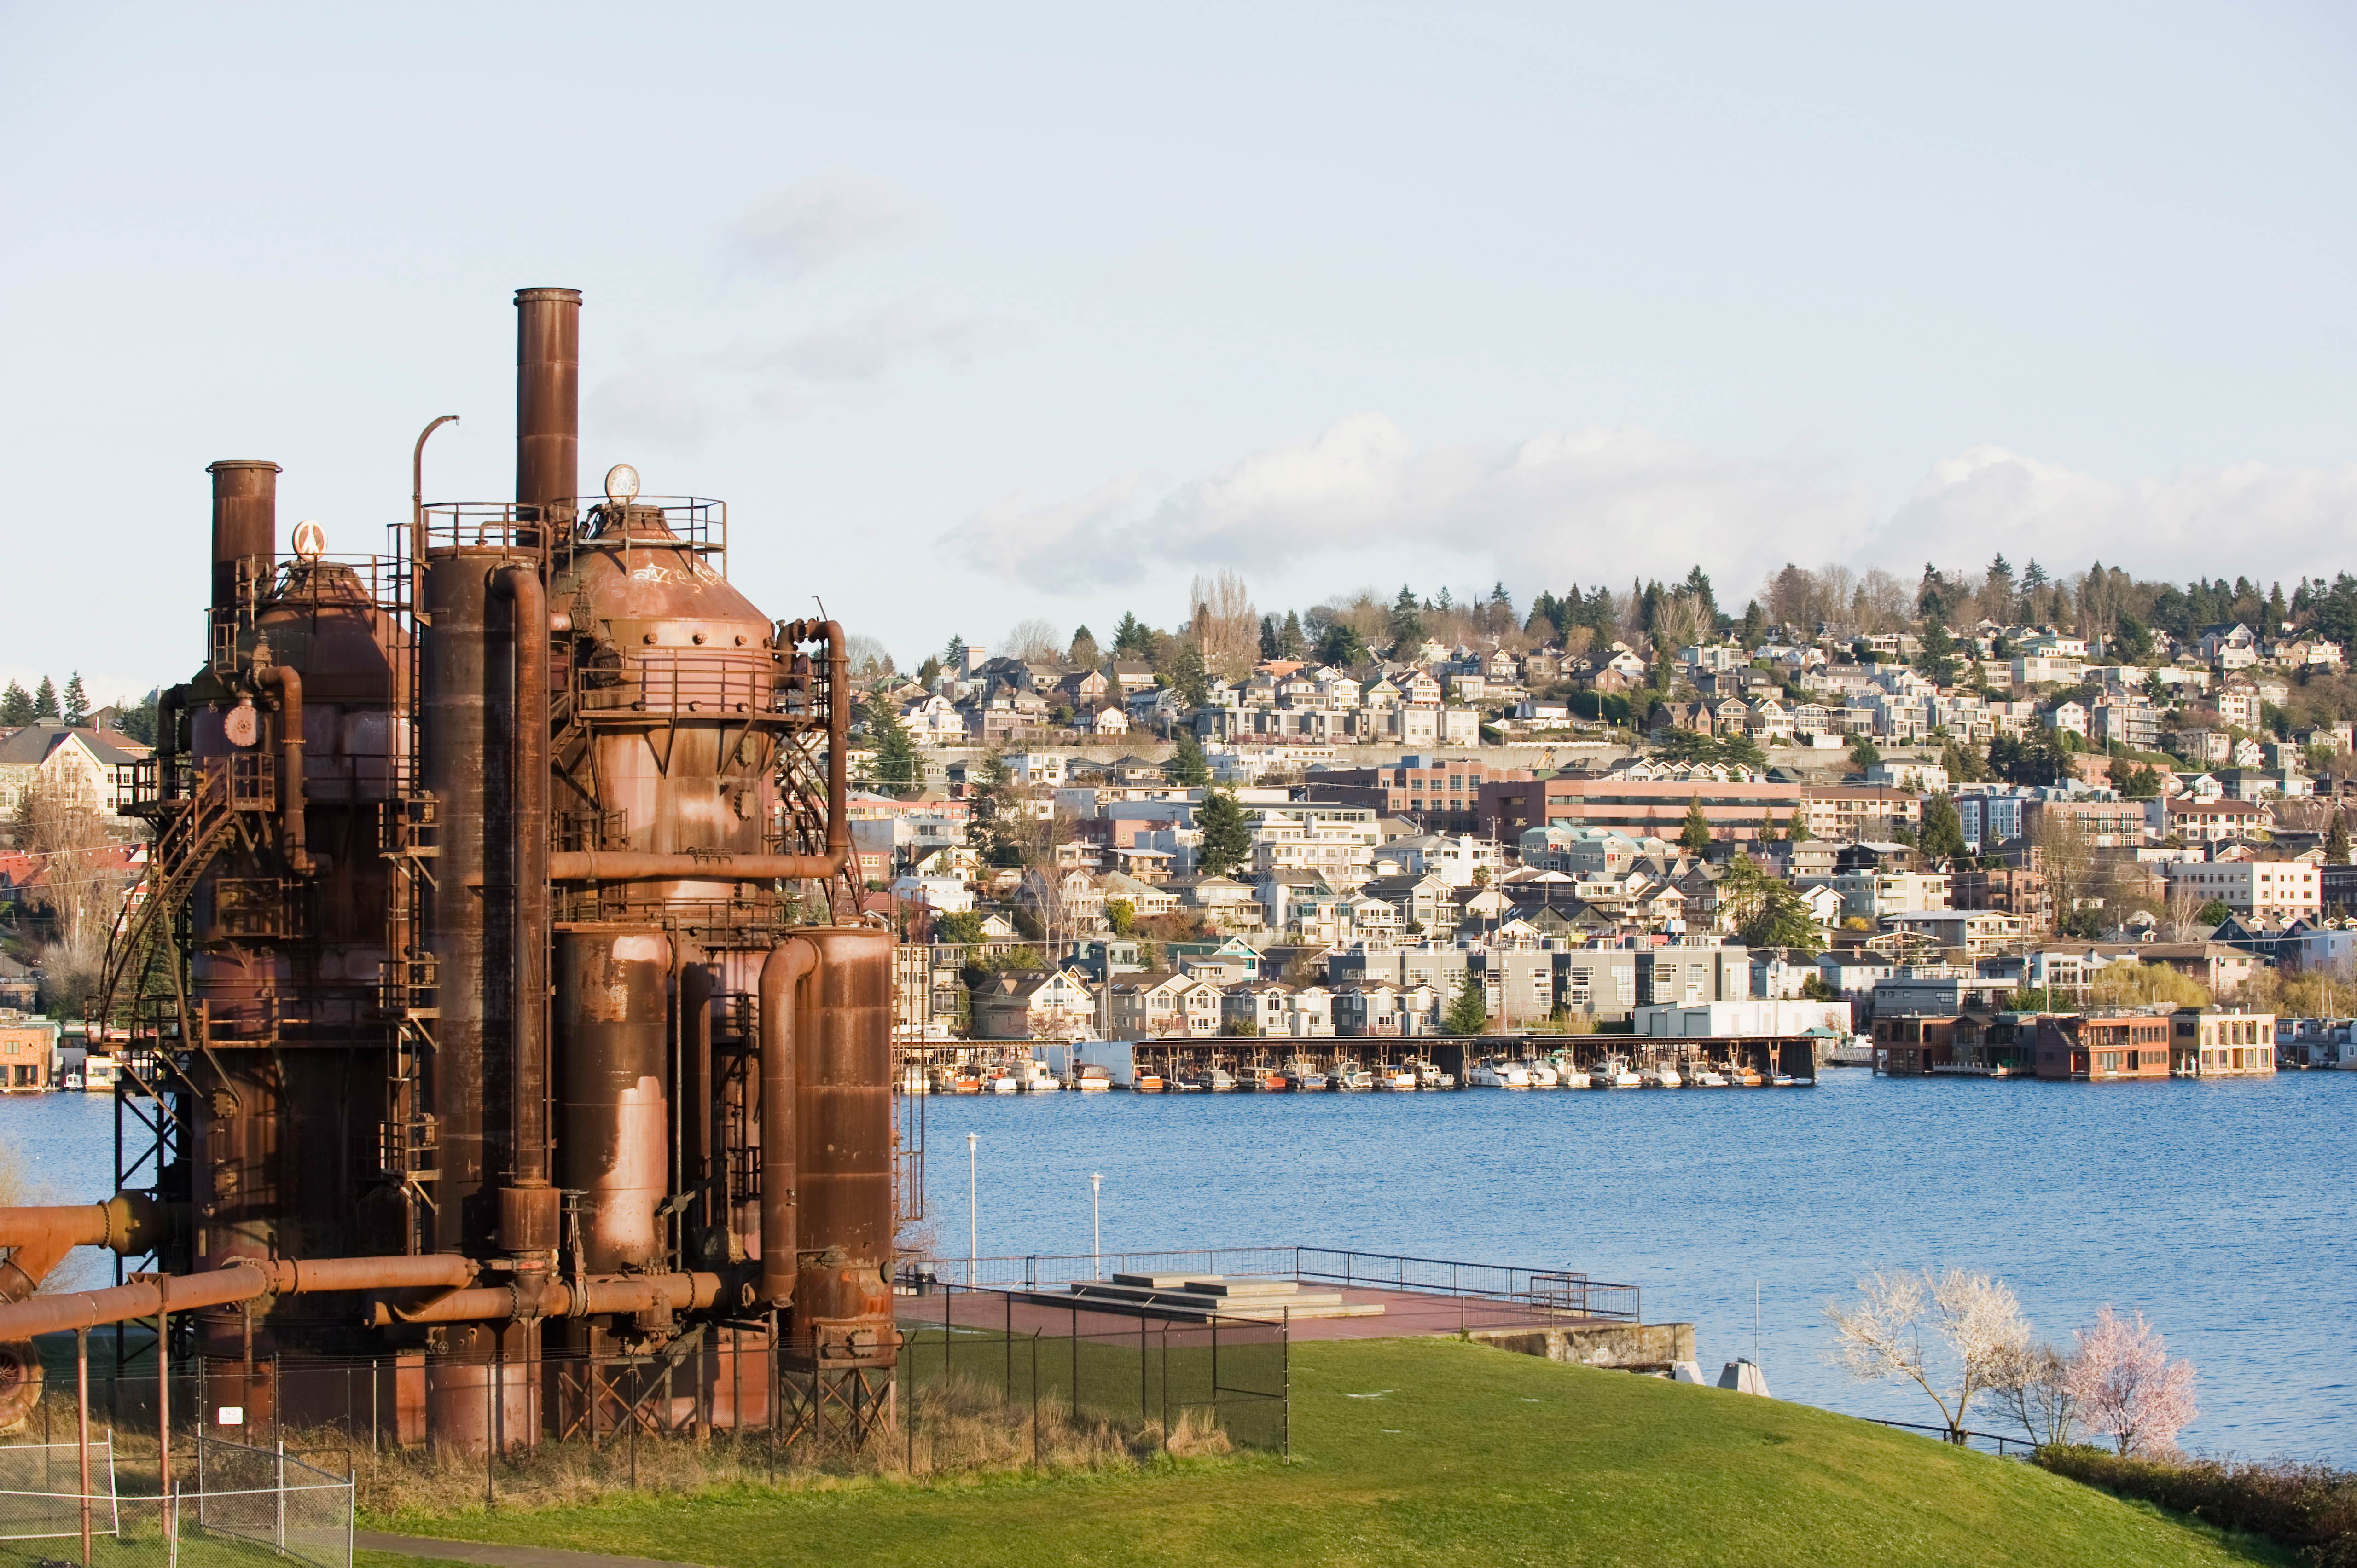 The steampunk-esque Gas Works Park contains the remnants of the last coal gasification plant in the US – plus great views of the city. Image by Christian Kober / Getty